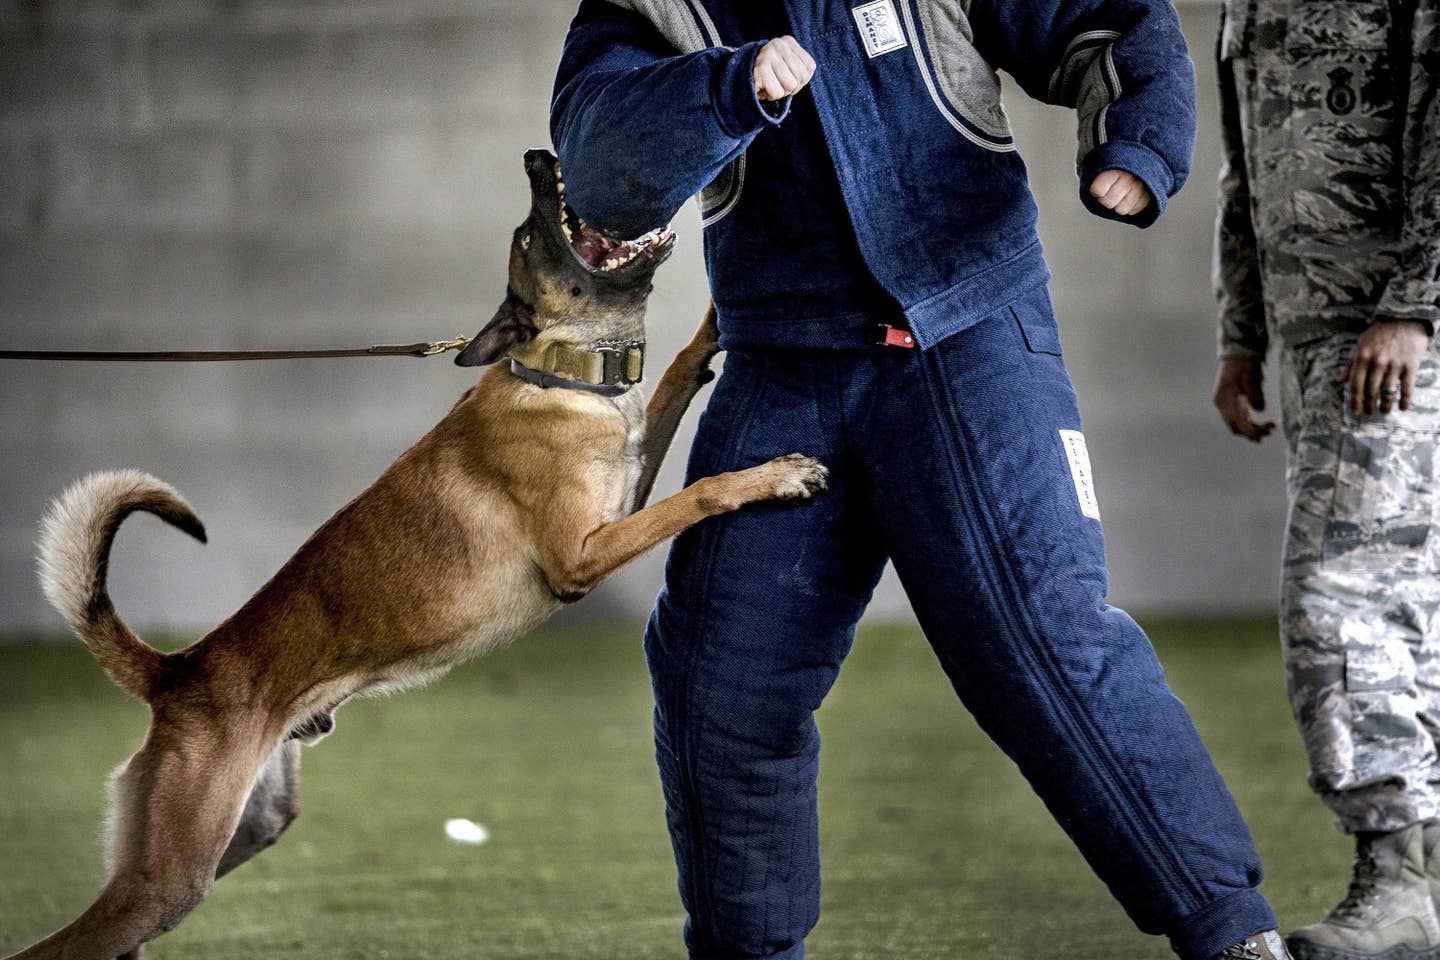 Ttoby, a military working dog, performs a bite attack during a demonstration at Moody Air Force Base, Ga., Feb. 2, 2017. (Air Force photo by Tech. Sgt. Zachary Wolf)